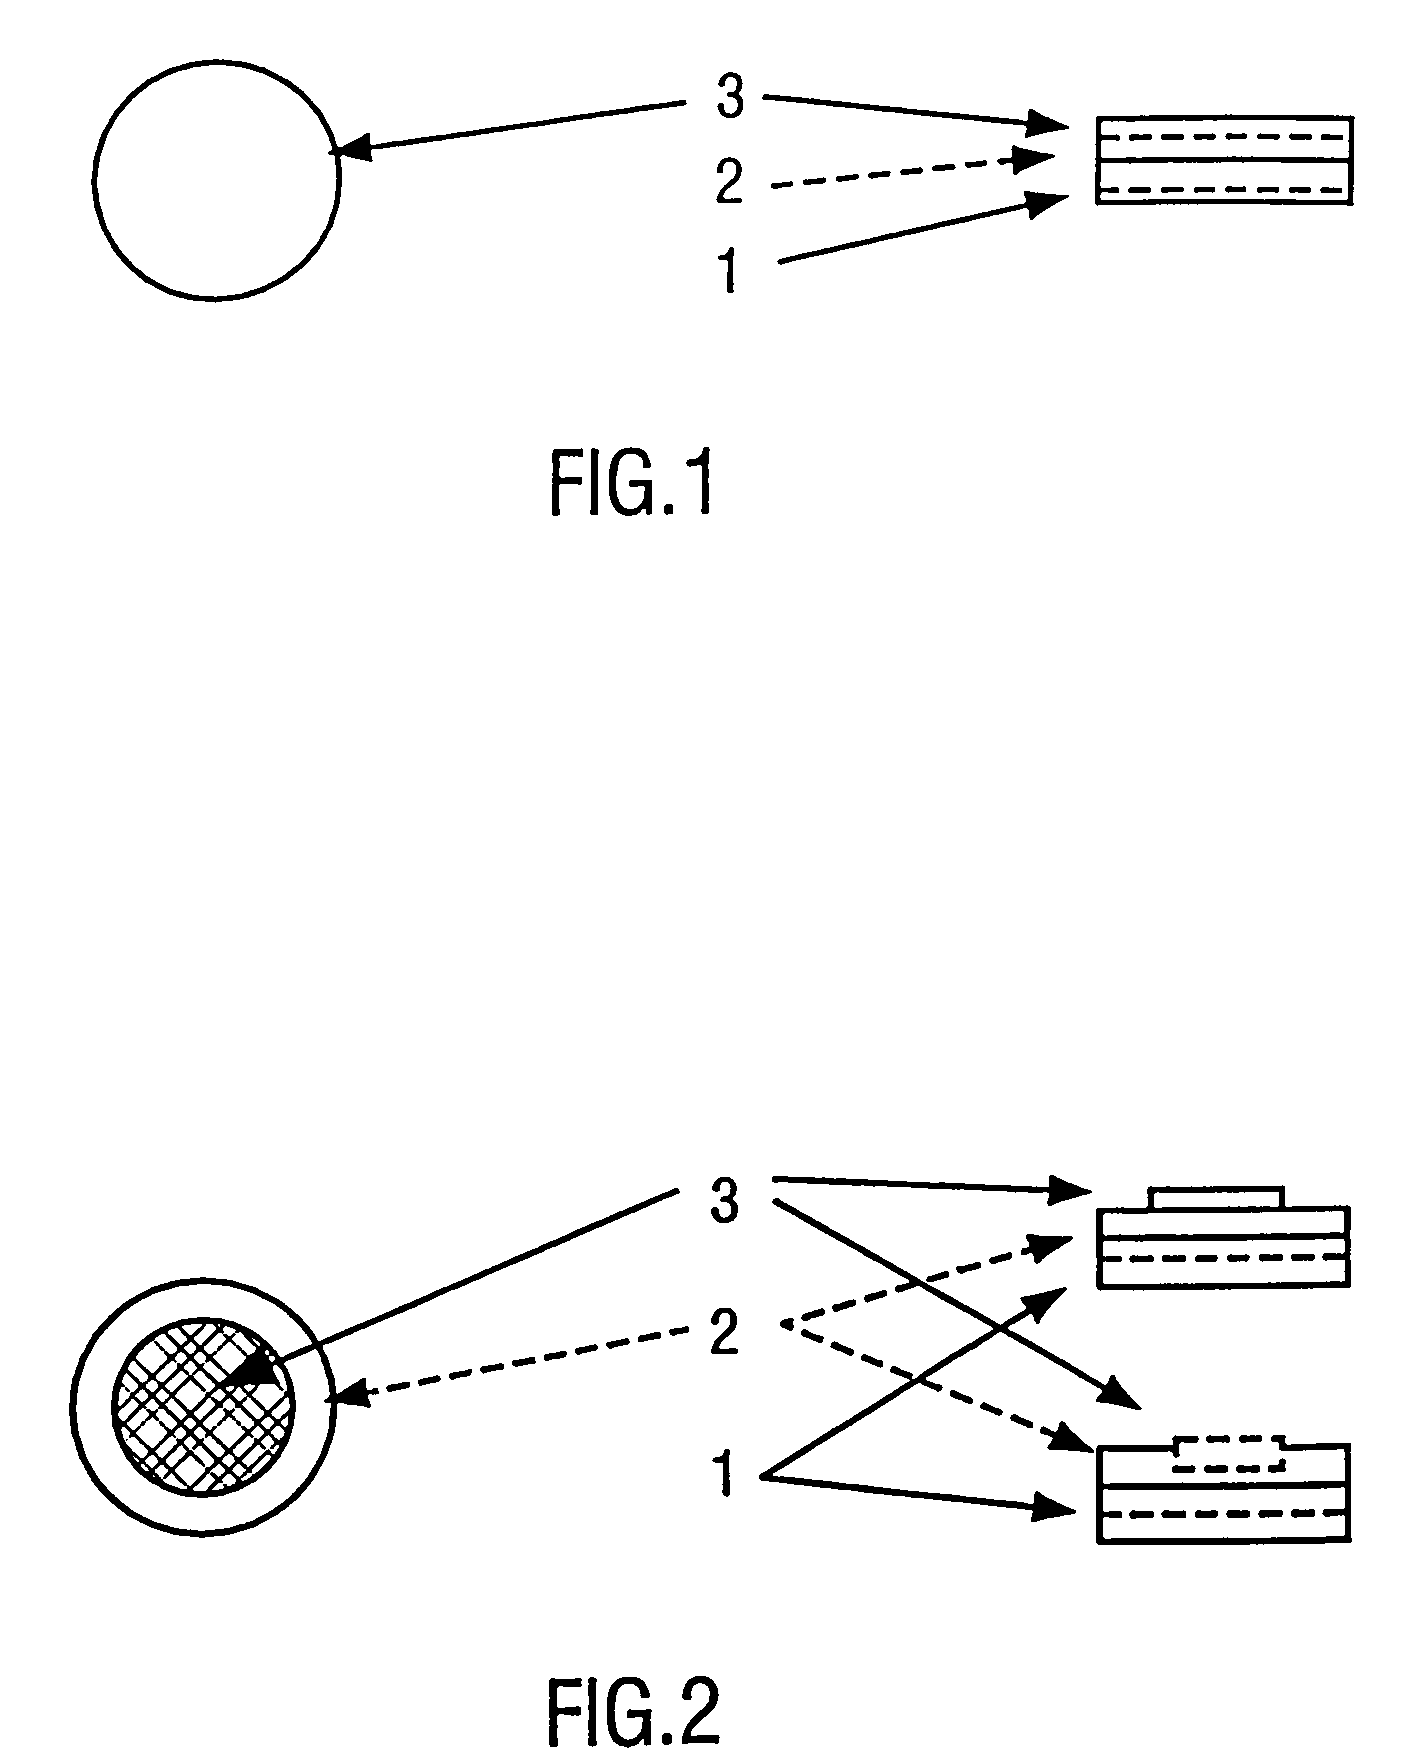 Pharmaceutical carrier device suitable for delivery of pharmaceutical compounds to mucosal surfaces